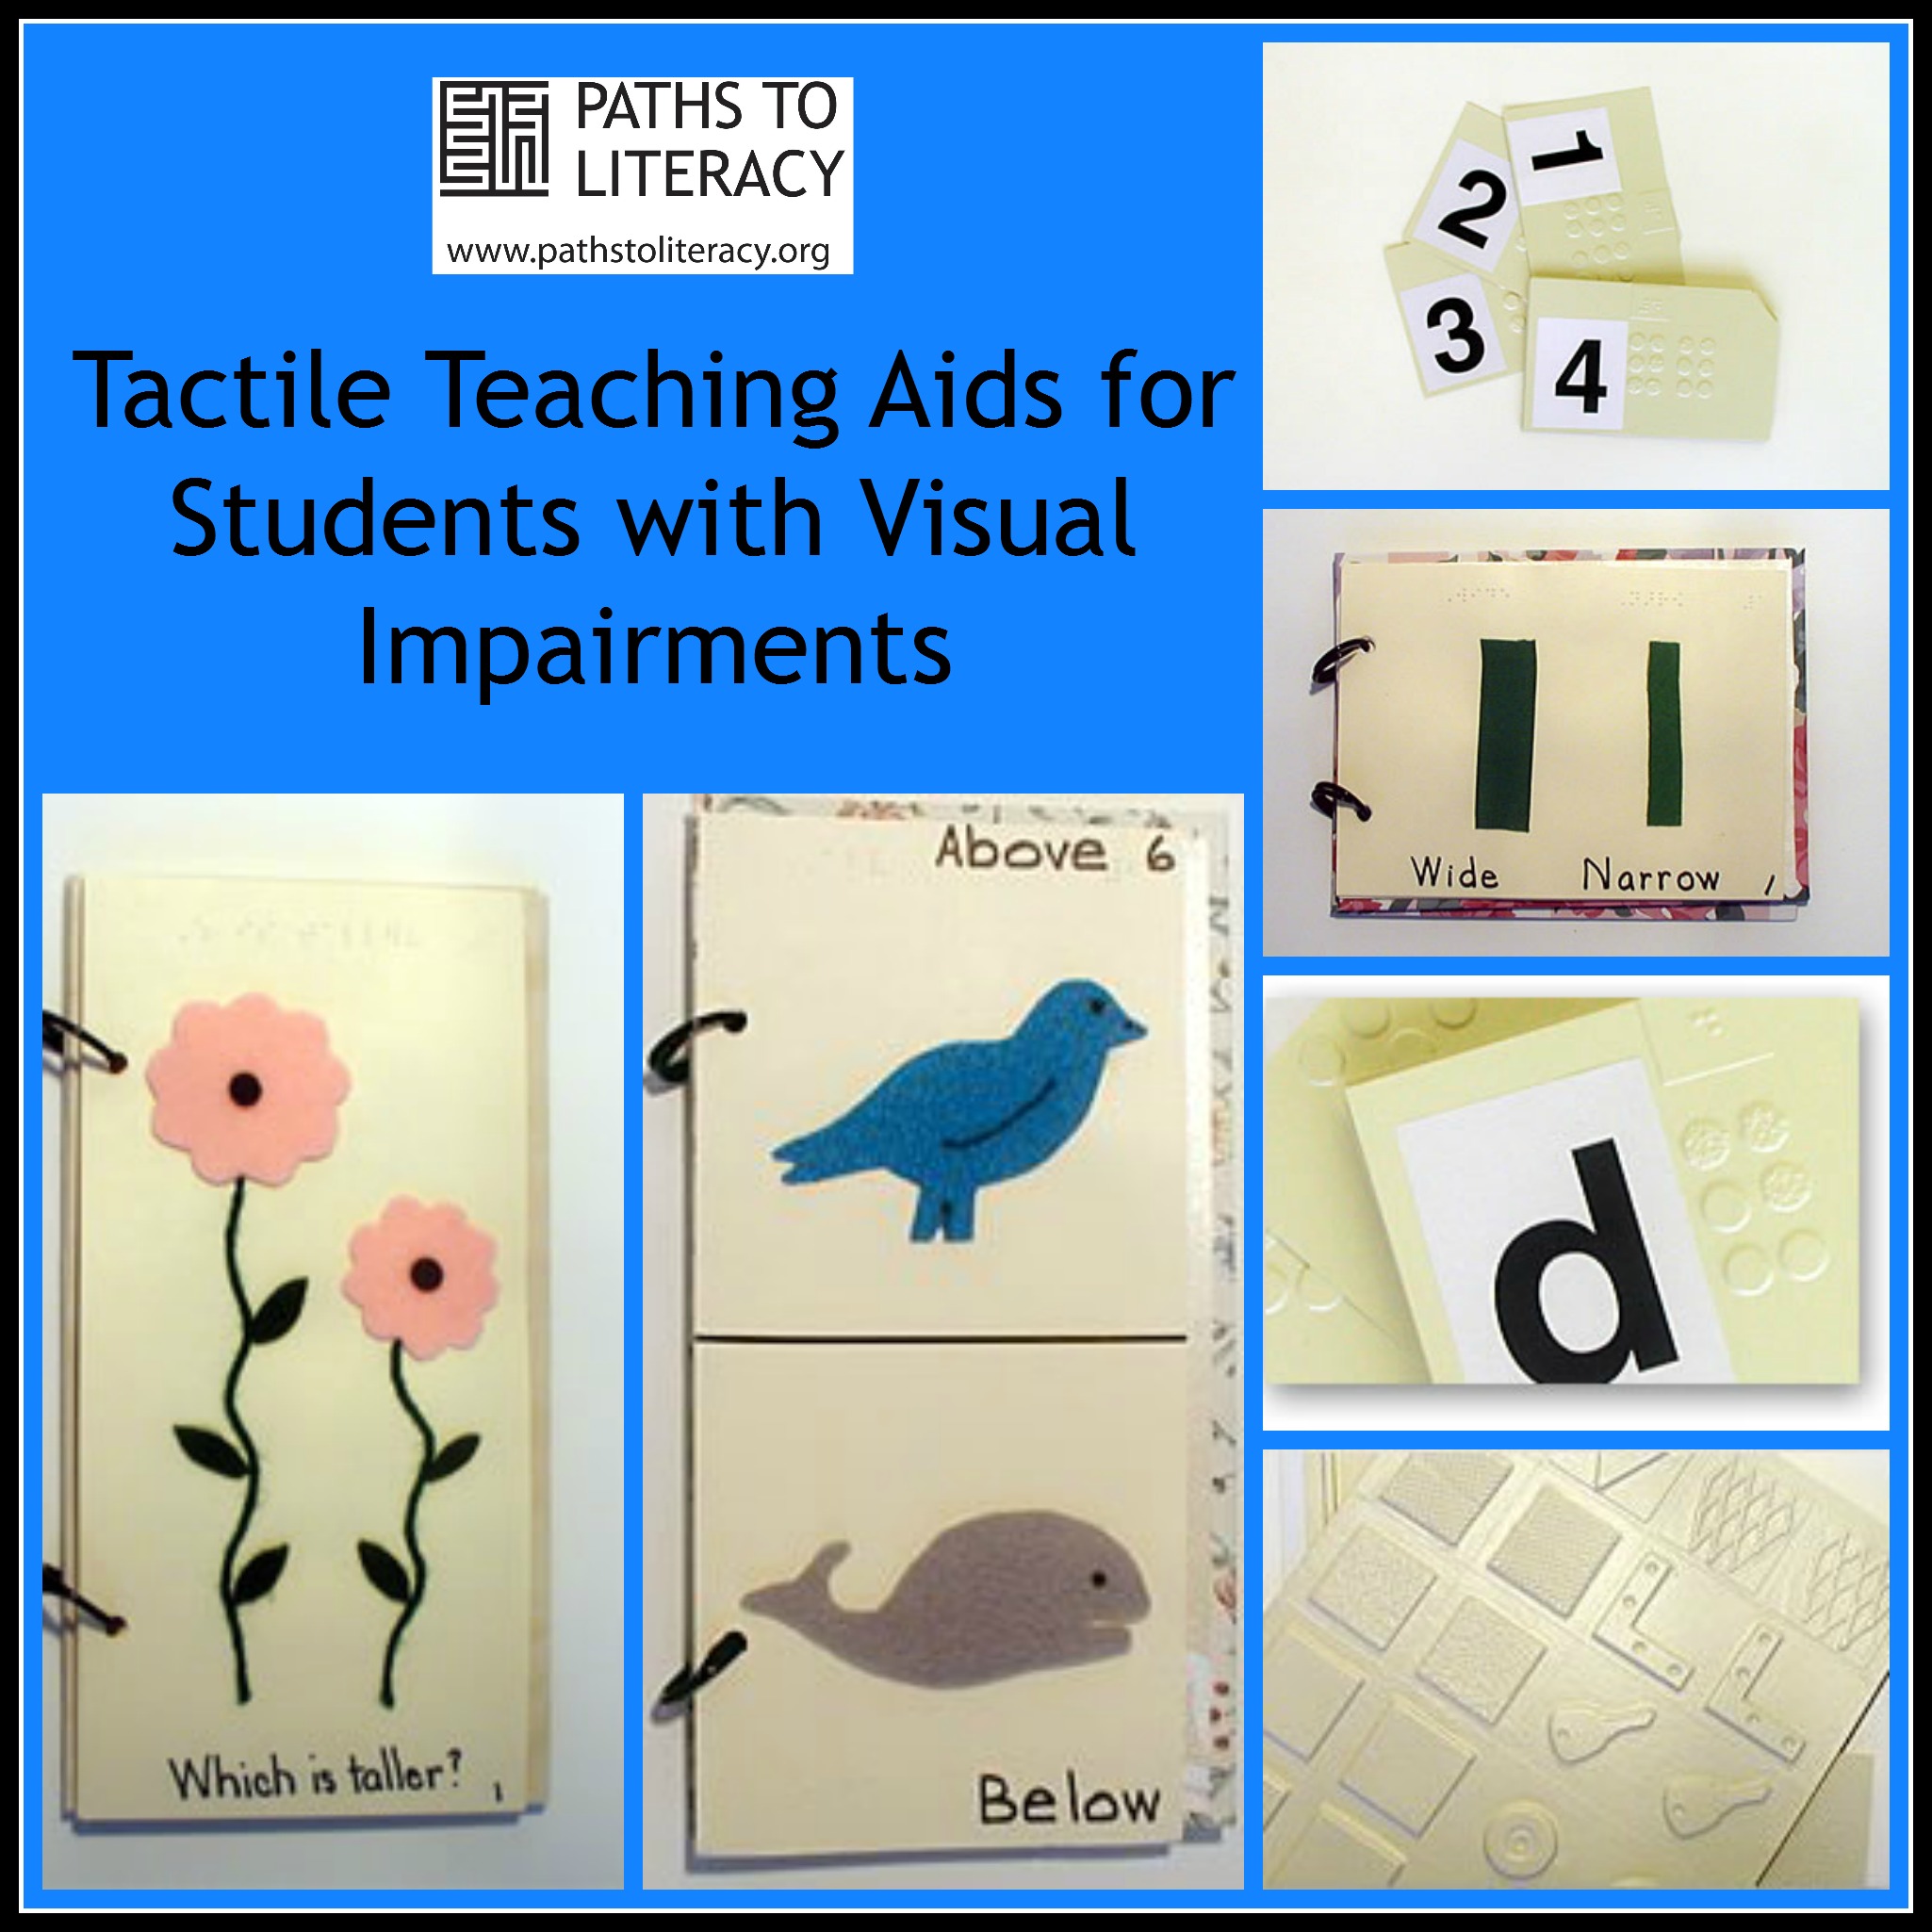 Tactile teaching aids for children with visual impairments